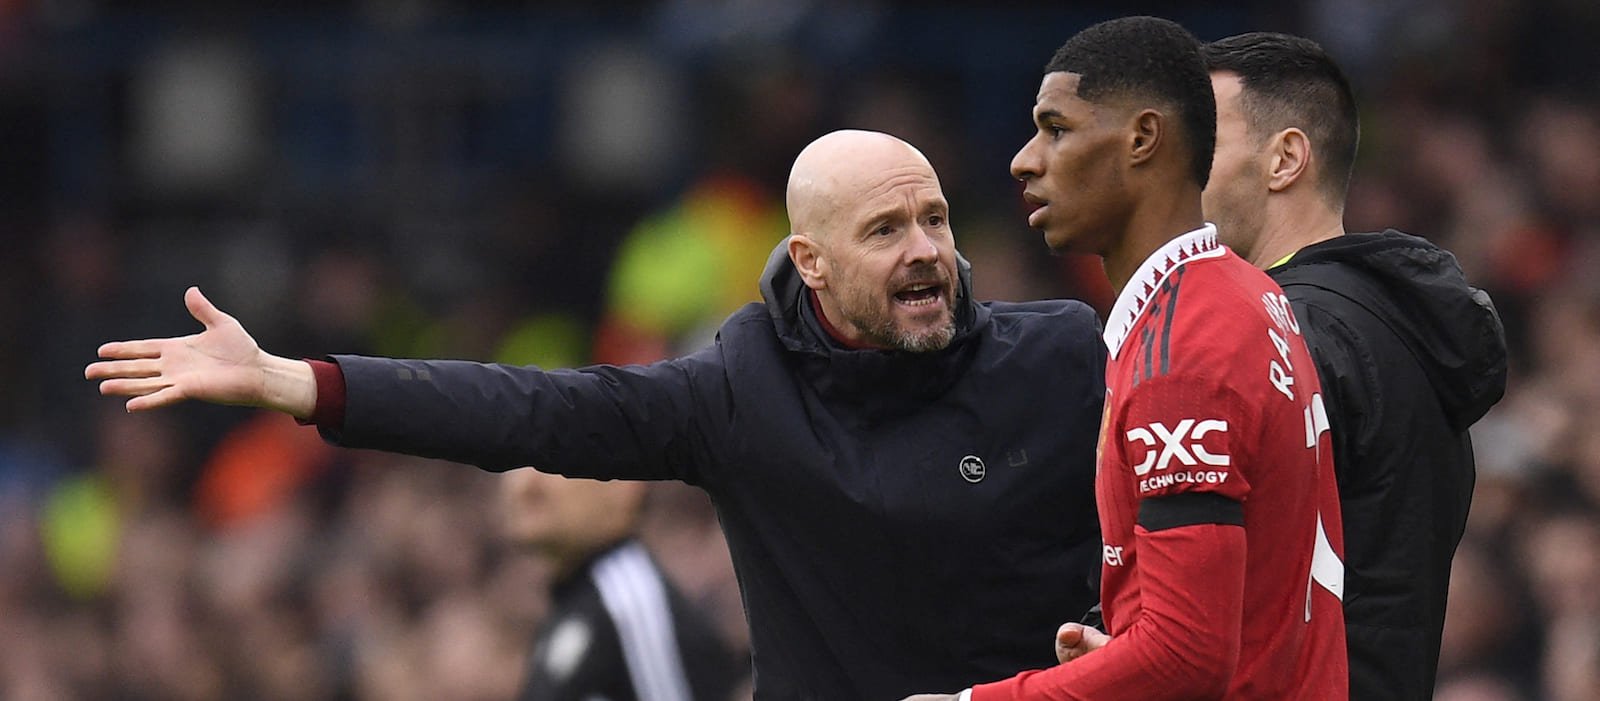 Erik ten Hag tells Marcus Rashford he can be “unstoppable” vs. Man City if he gets his attitude right – Man United News And Transfer News